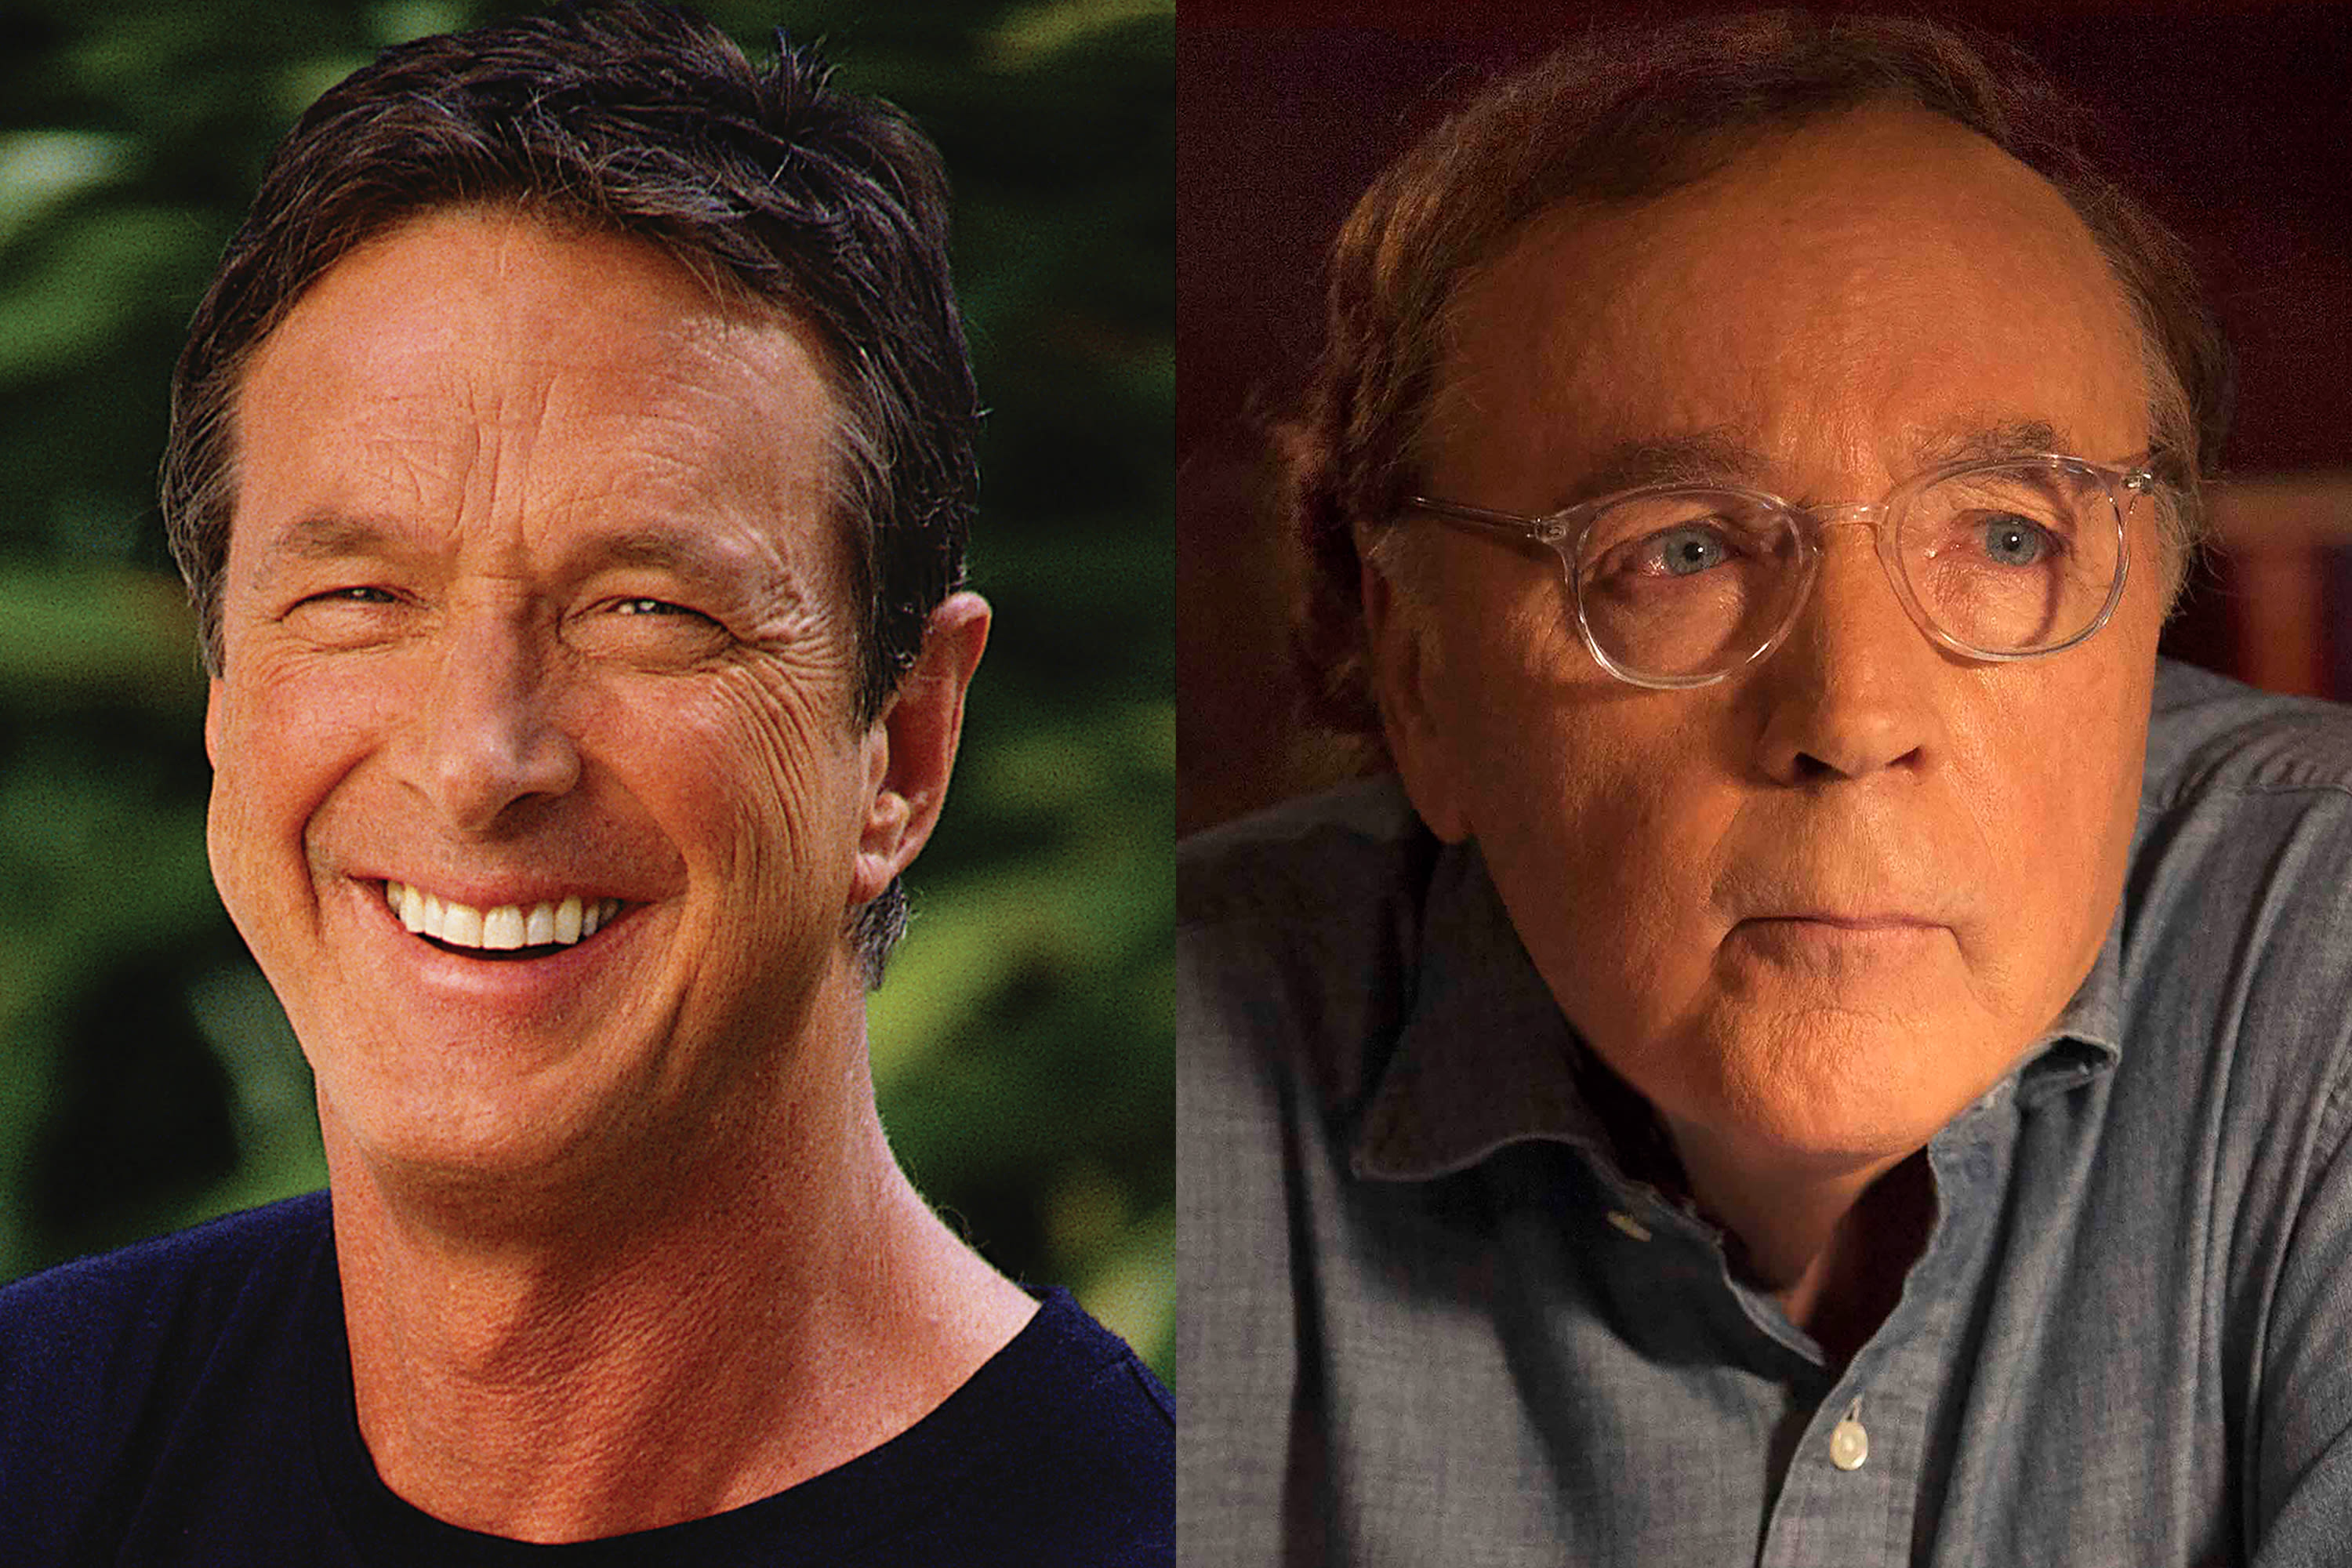 James Patterson realized Michael Crichton's vision for a volcano thriller 16 years after his death